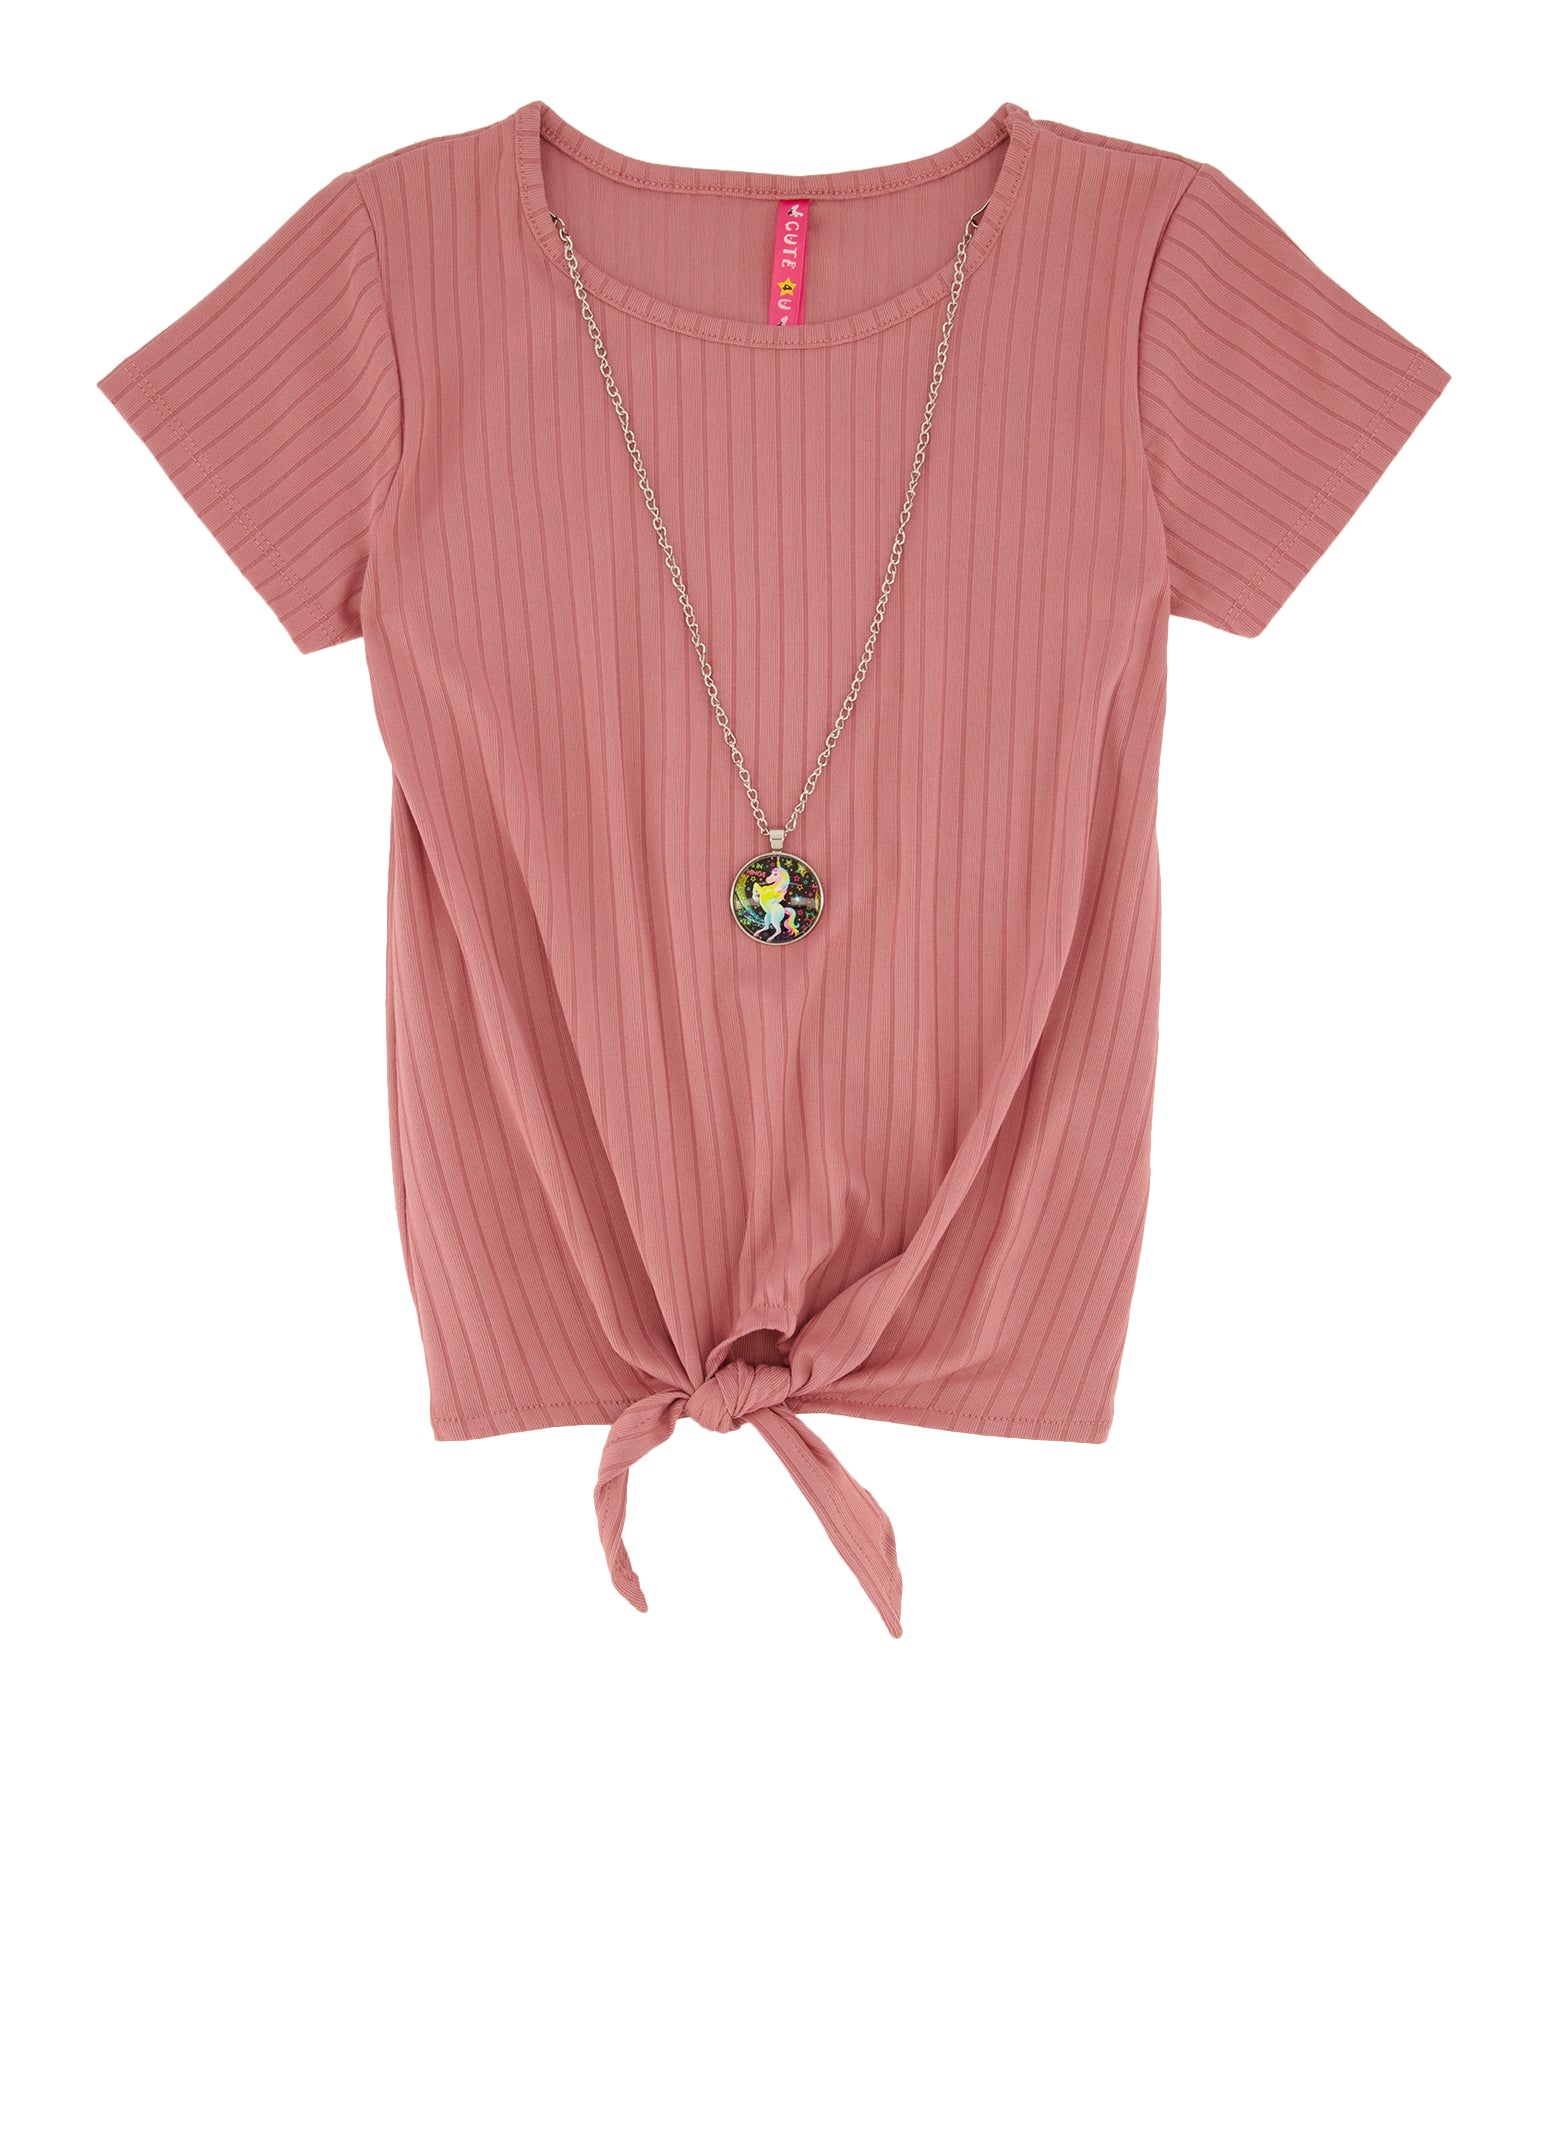 Girls Tie Front Top with Unicorn Graphic Necklace, Pink, Size 7-8